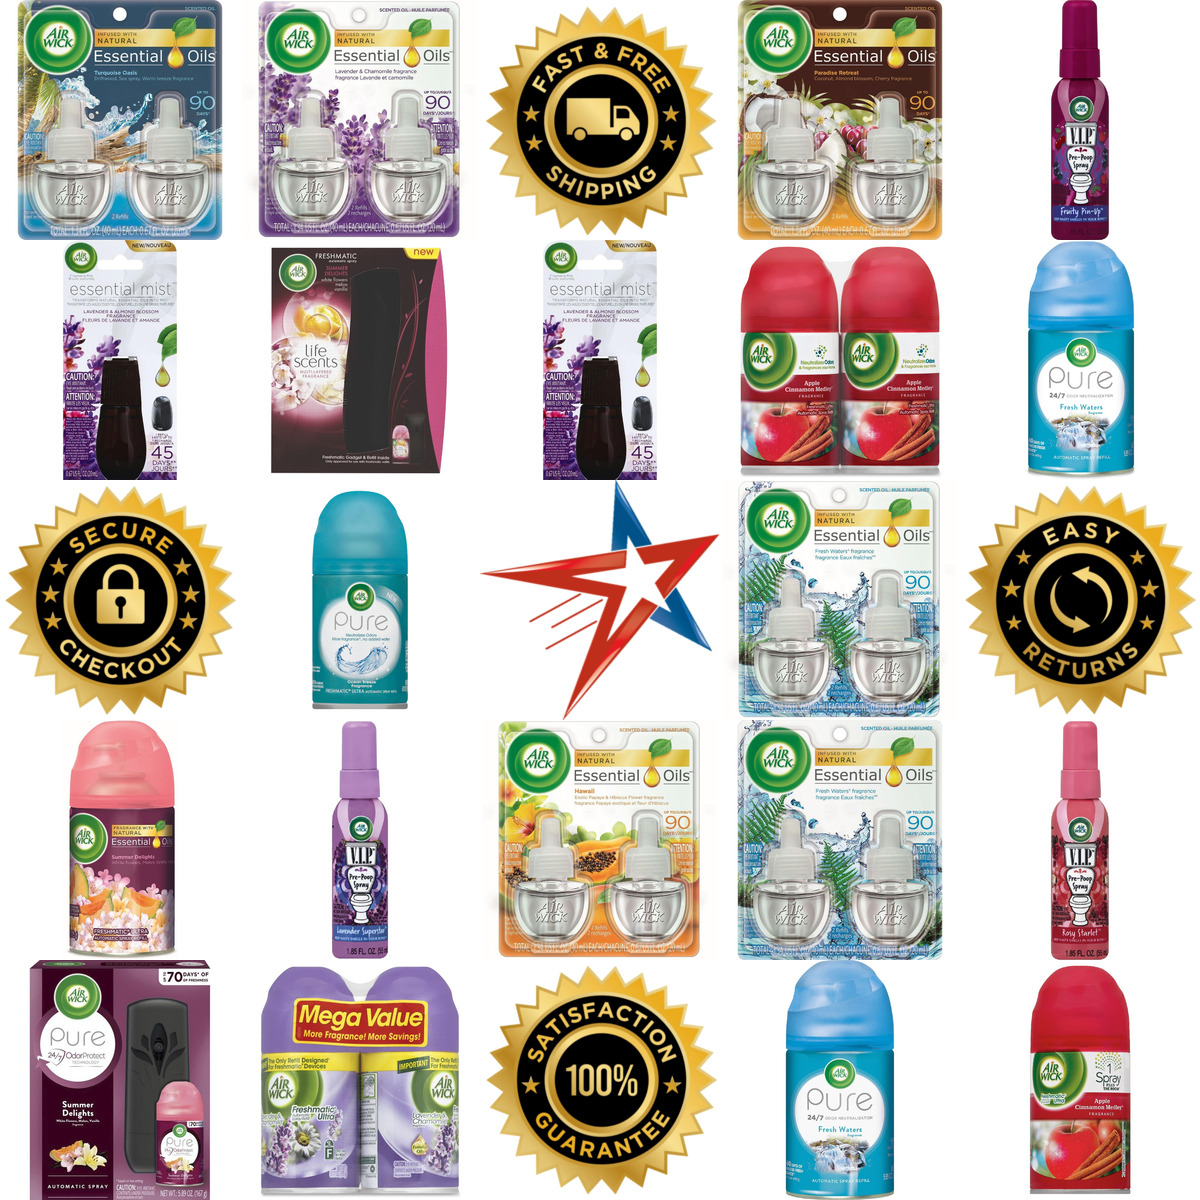 A selection of Reckitt Benckiser products on GoVets